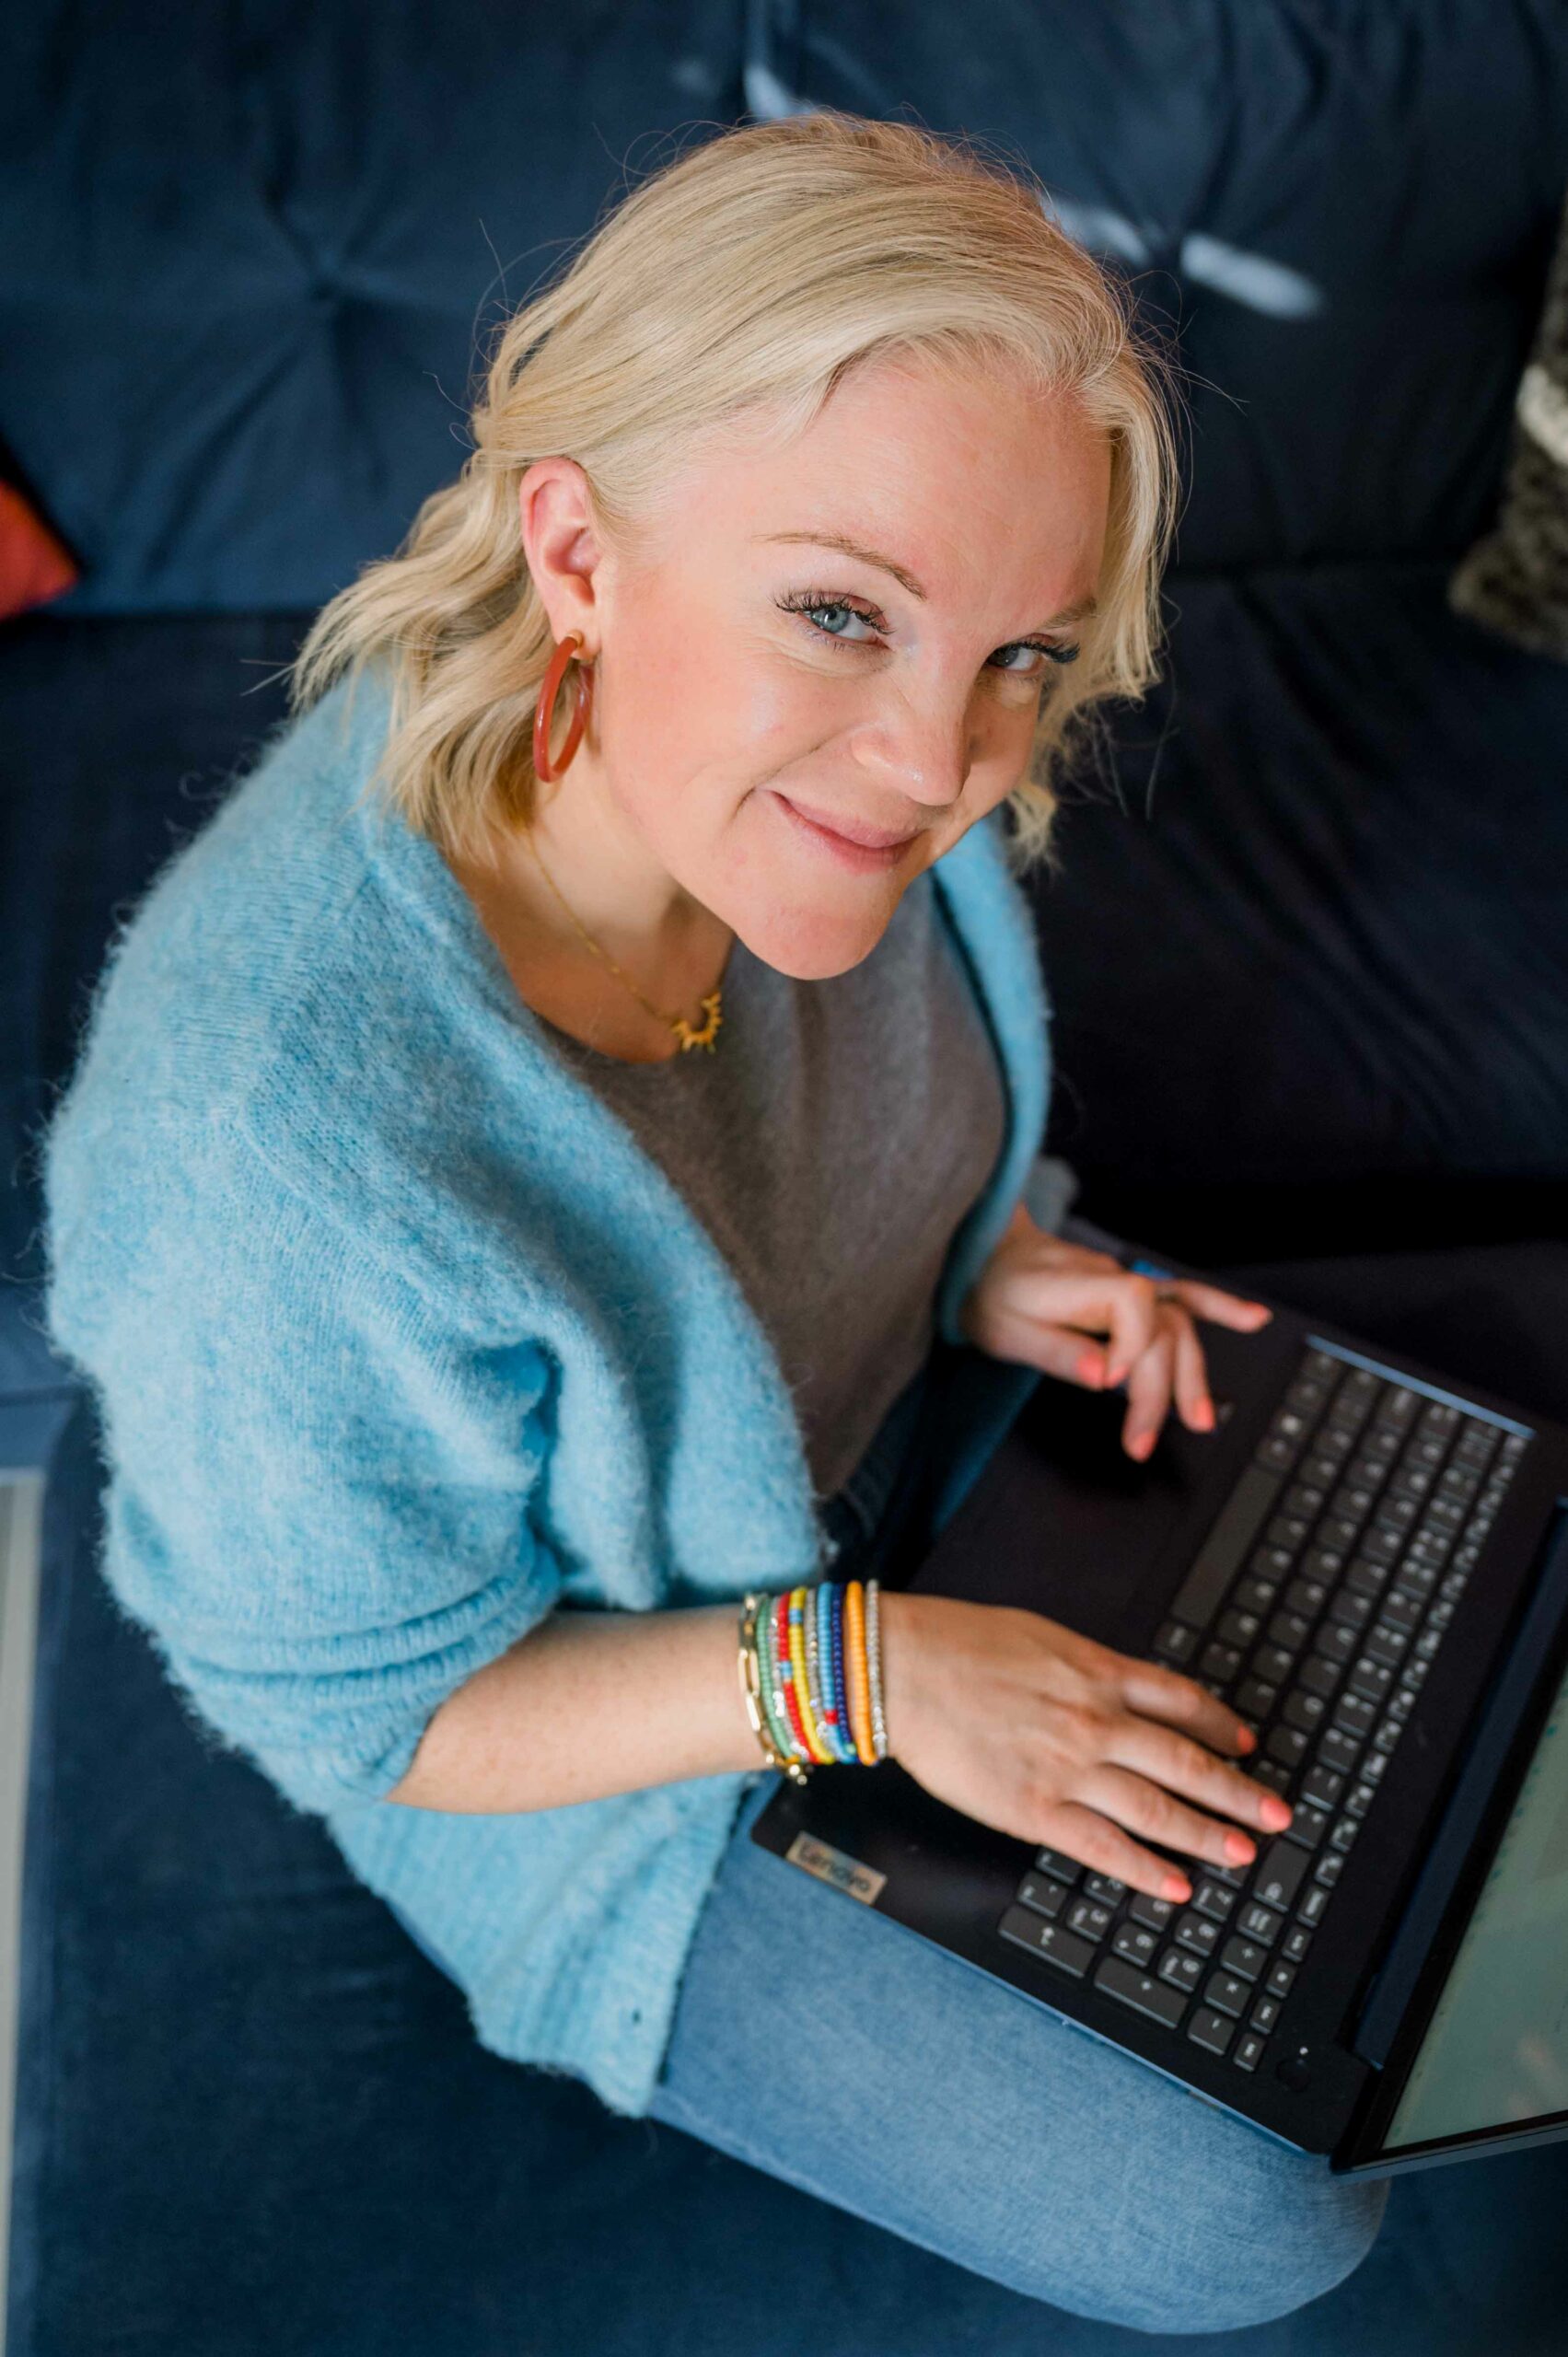 Blonde haired woman working with a laptop on her lap looking up to camera